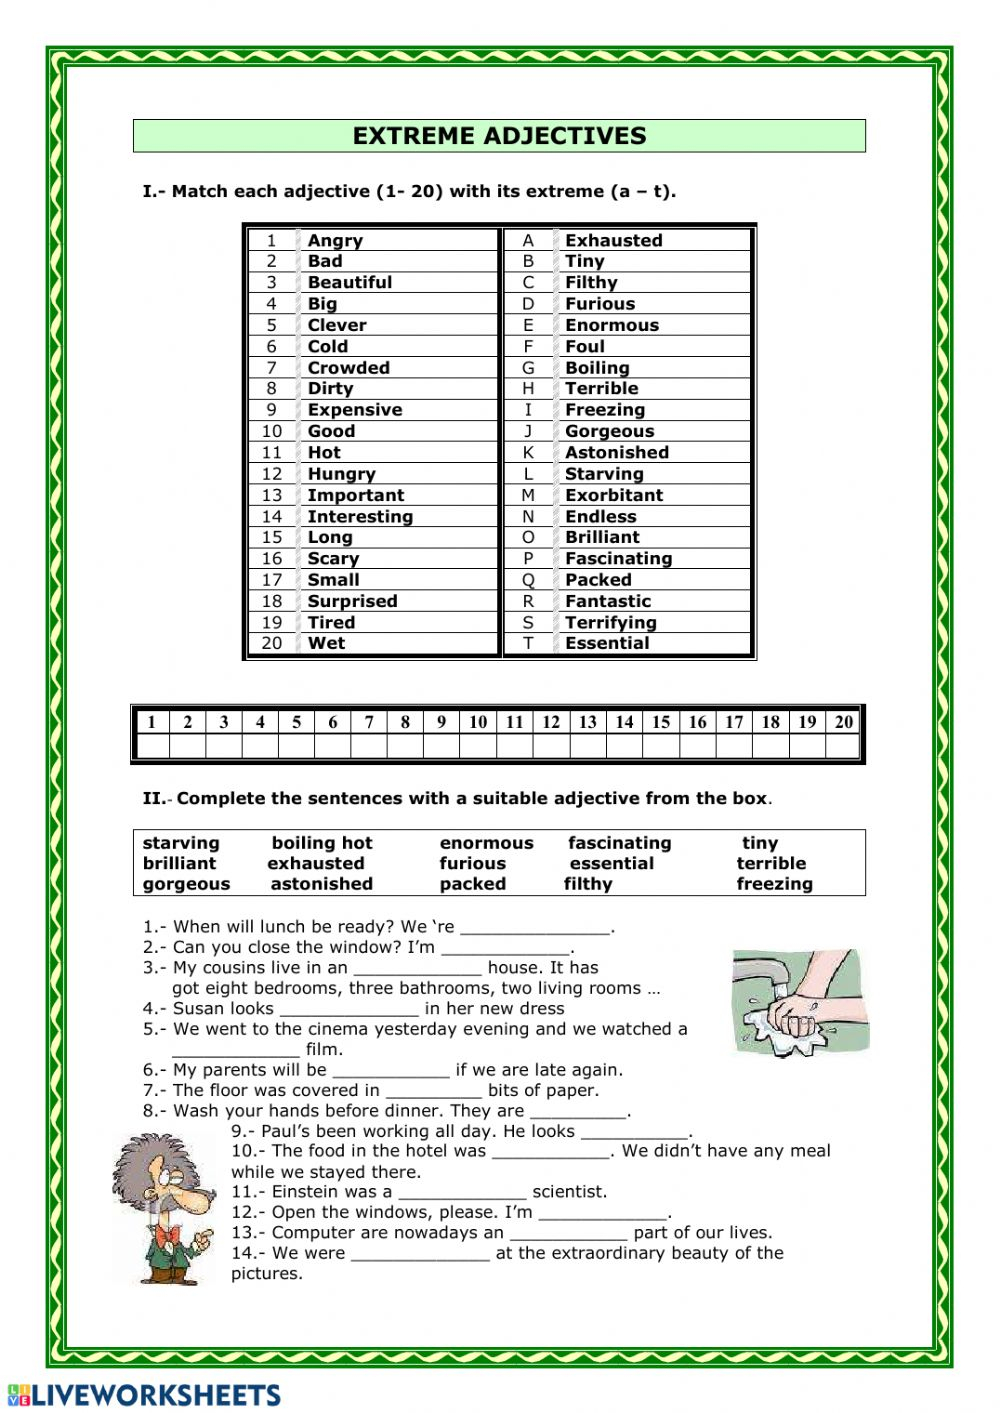 Extreme Adjectives Adjectives Activities Adjective Worksheet Adjectives The Best Porn Website